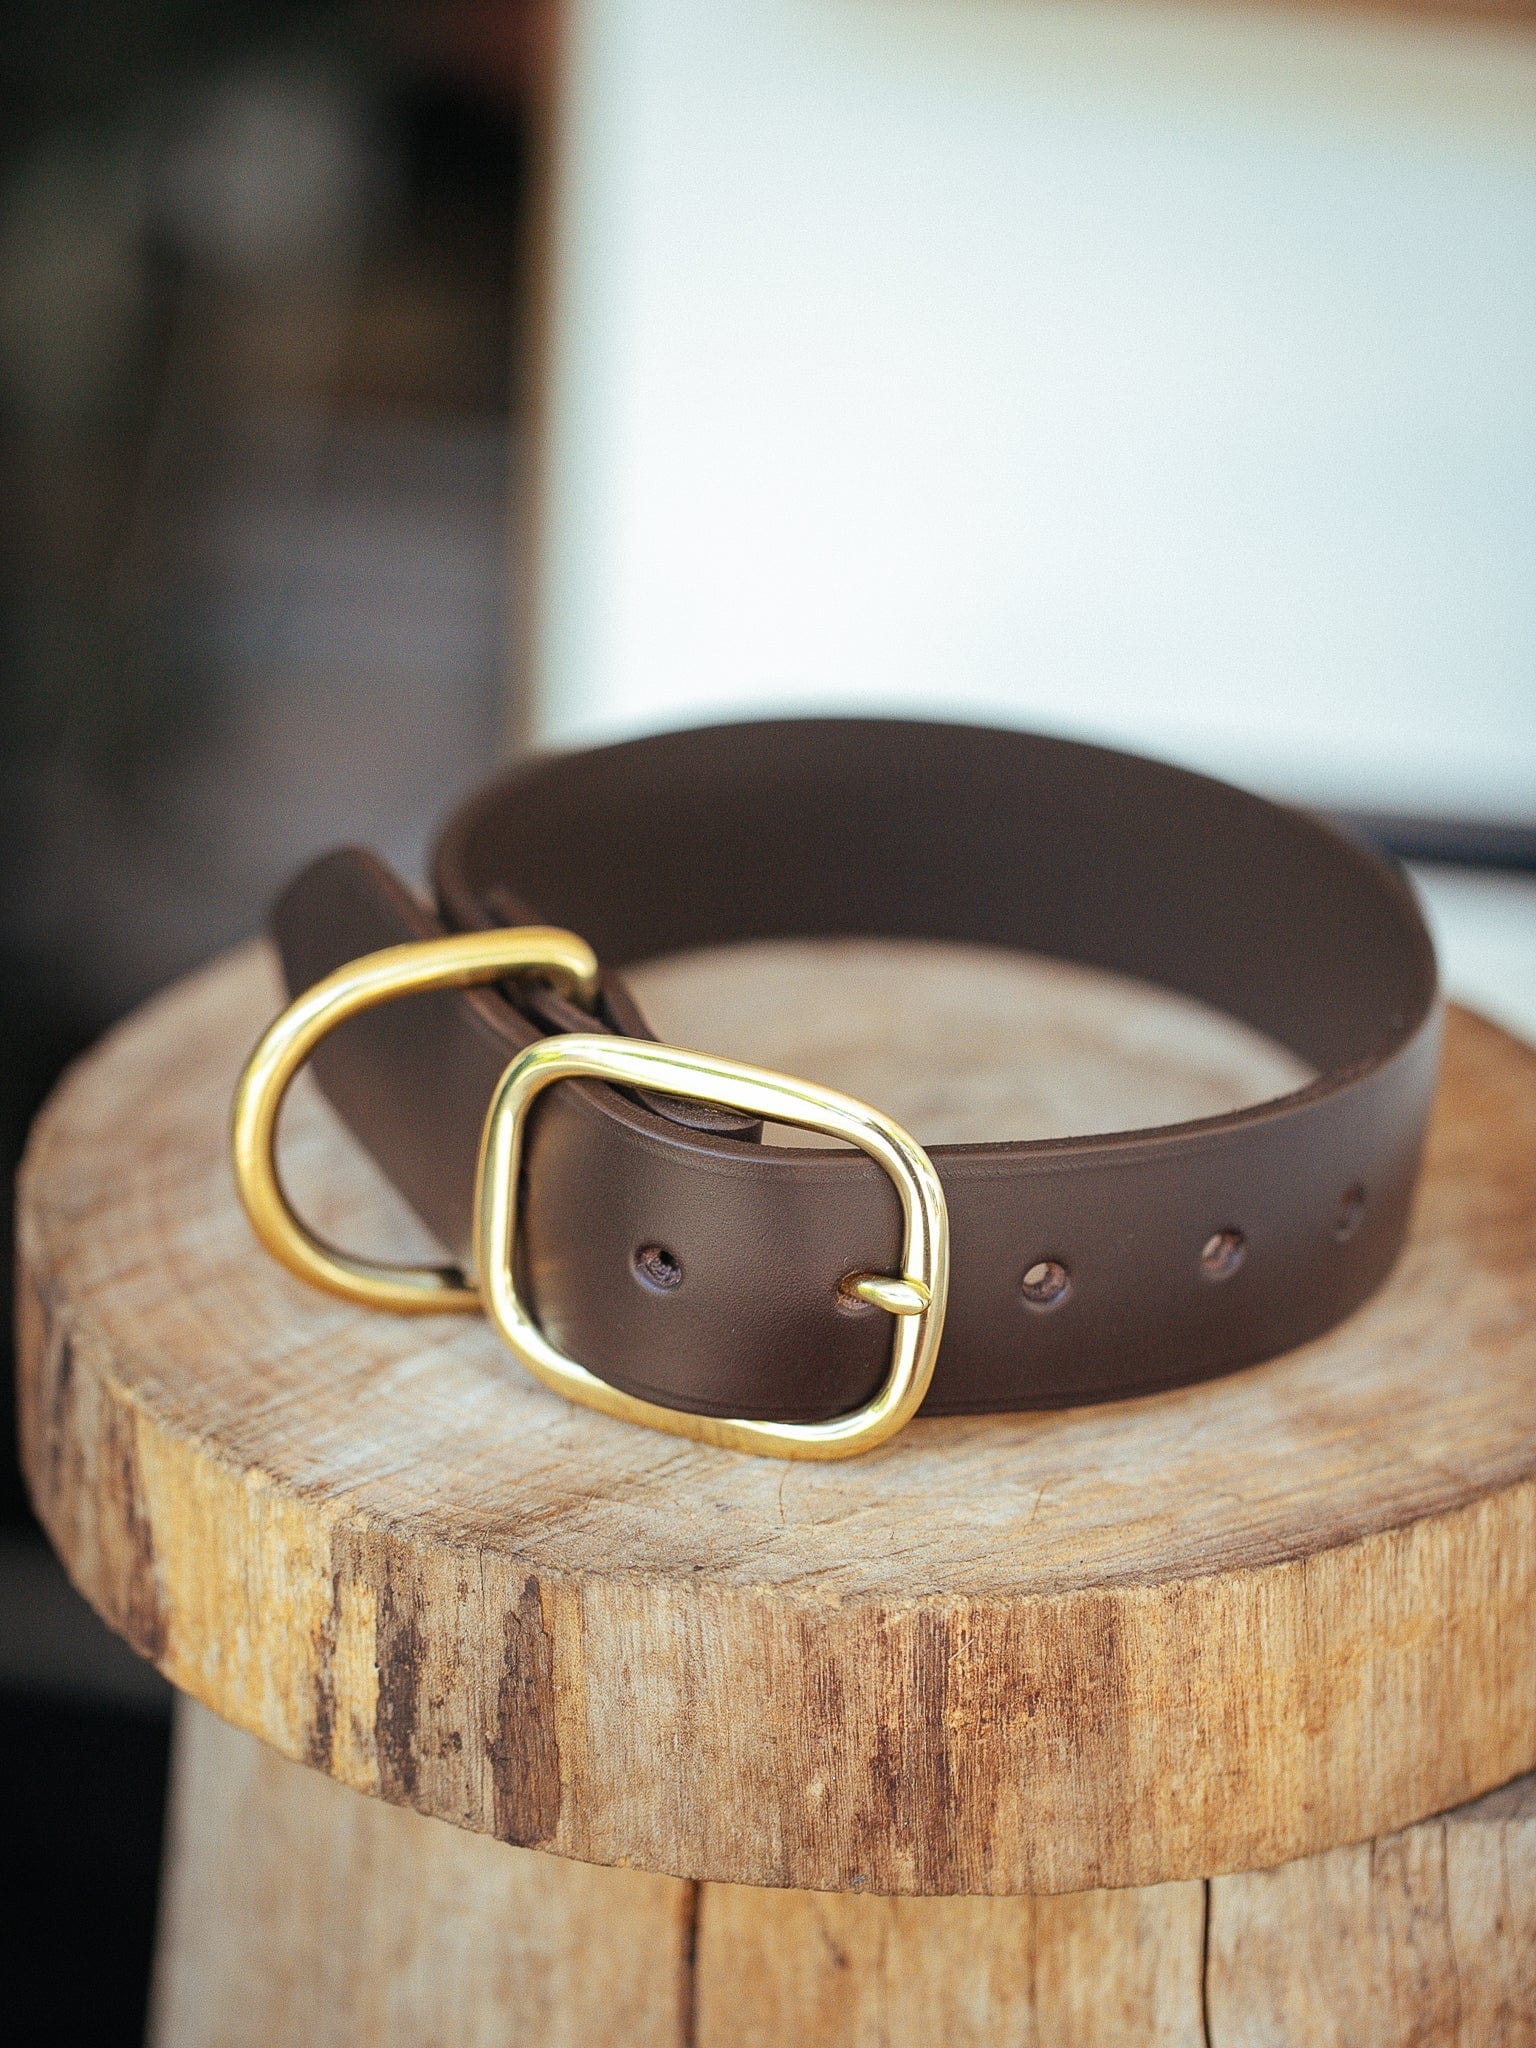 The Real McCaul Leathergoods Pet Collars & Harnesses X Small (20-29cm) / Gold Classic Dog Collar - 32mm - Dark Brown Australian Made Australian Owned Leather Dog Collar with Brass Fittings- Australian Made